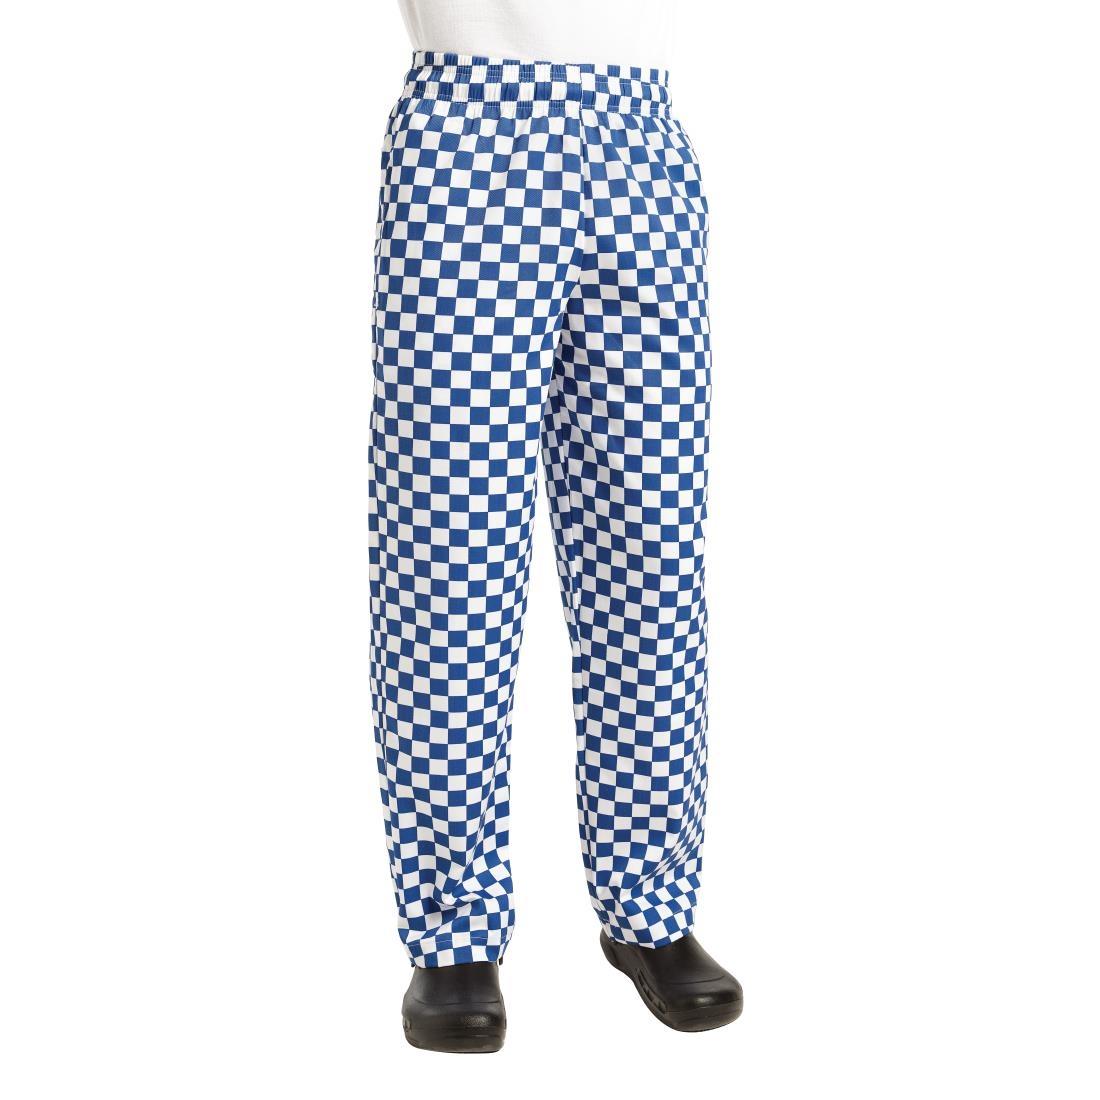 Chef Works Essential Baggy Pants Big Blue Check XS - A043-XS  - 1